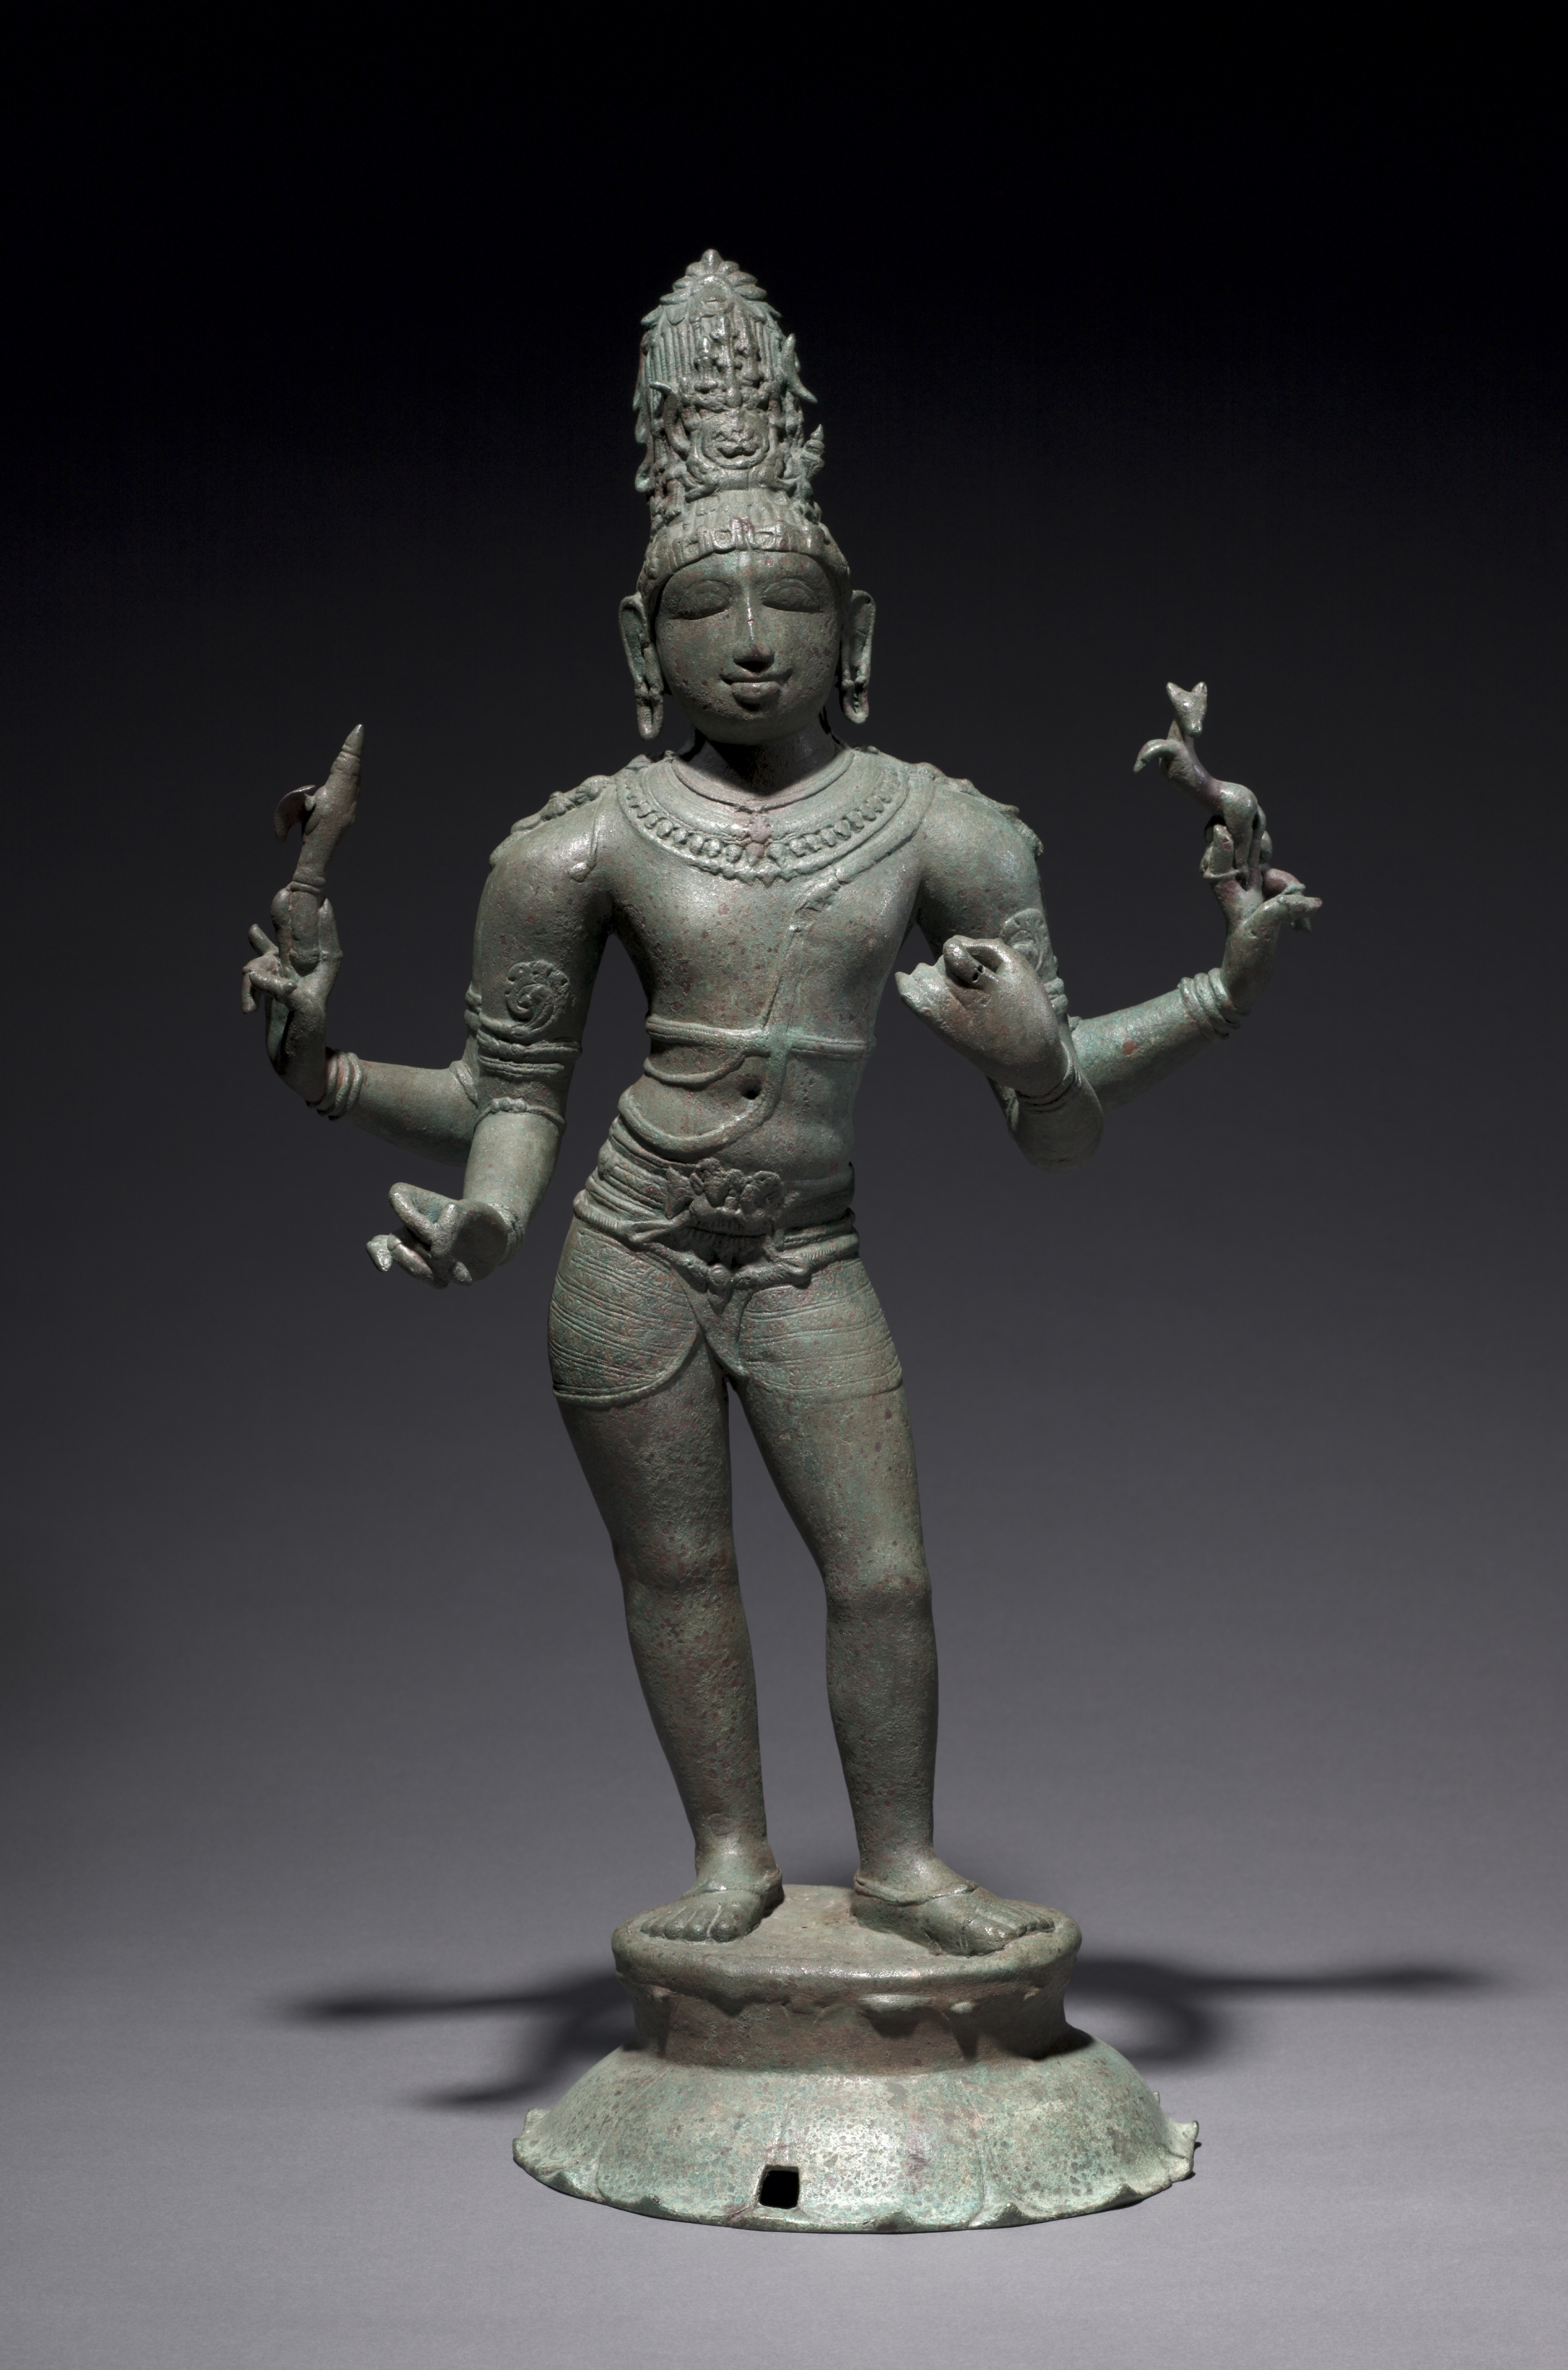 Shiva as Lord of Music South India, Tamil Nadu, Chola period (900 